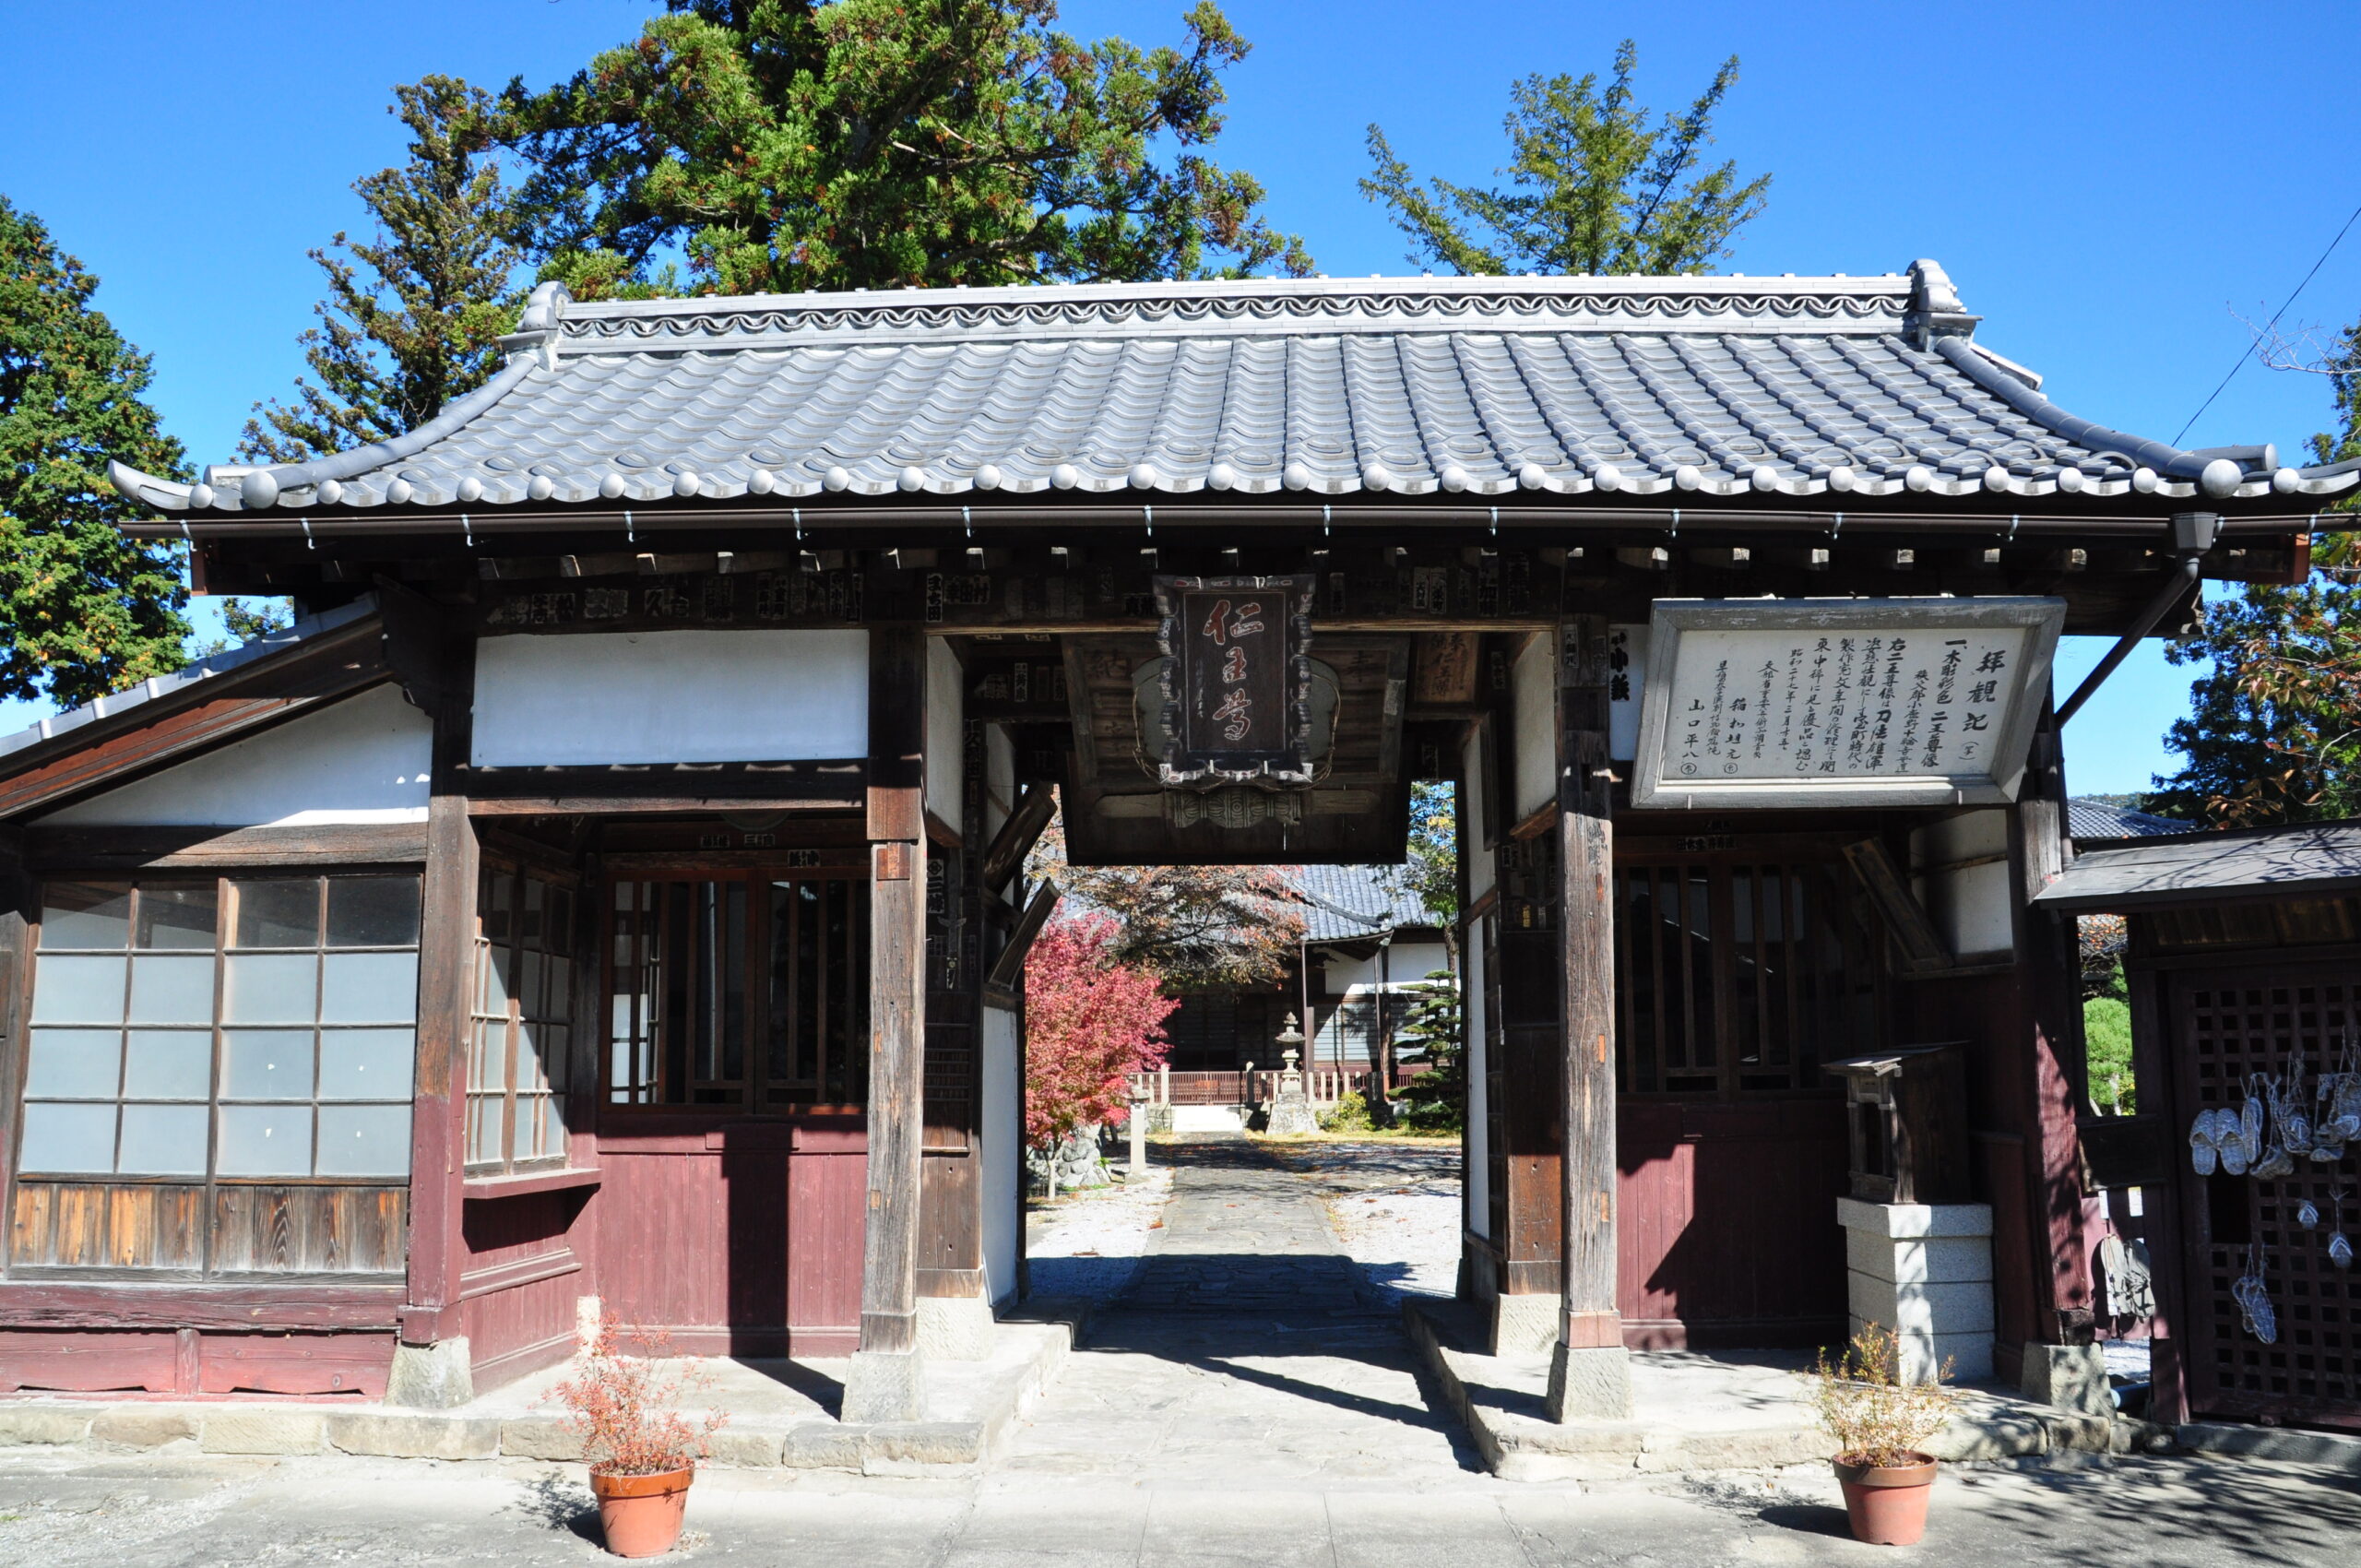 Juurinji: A Small Temple in the Heart of the Town